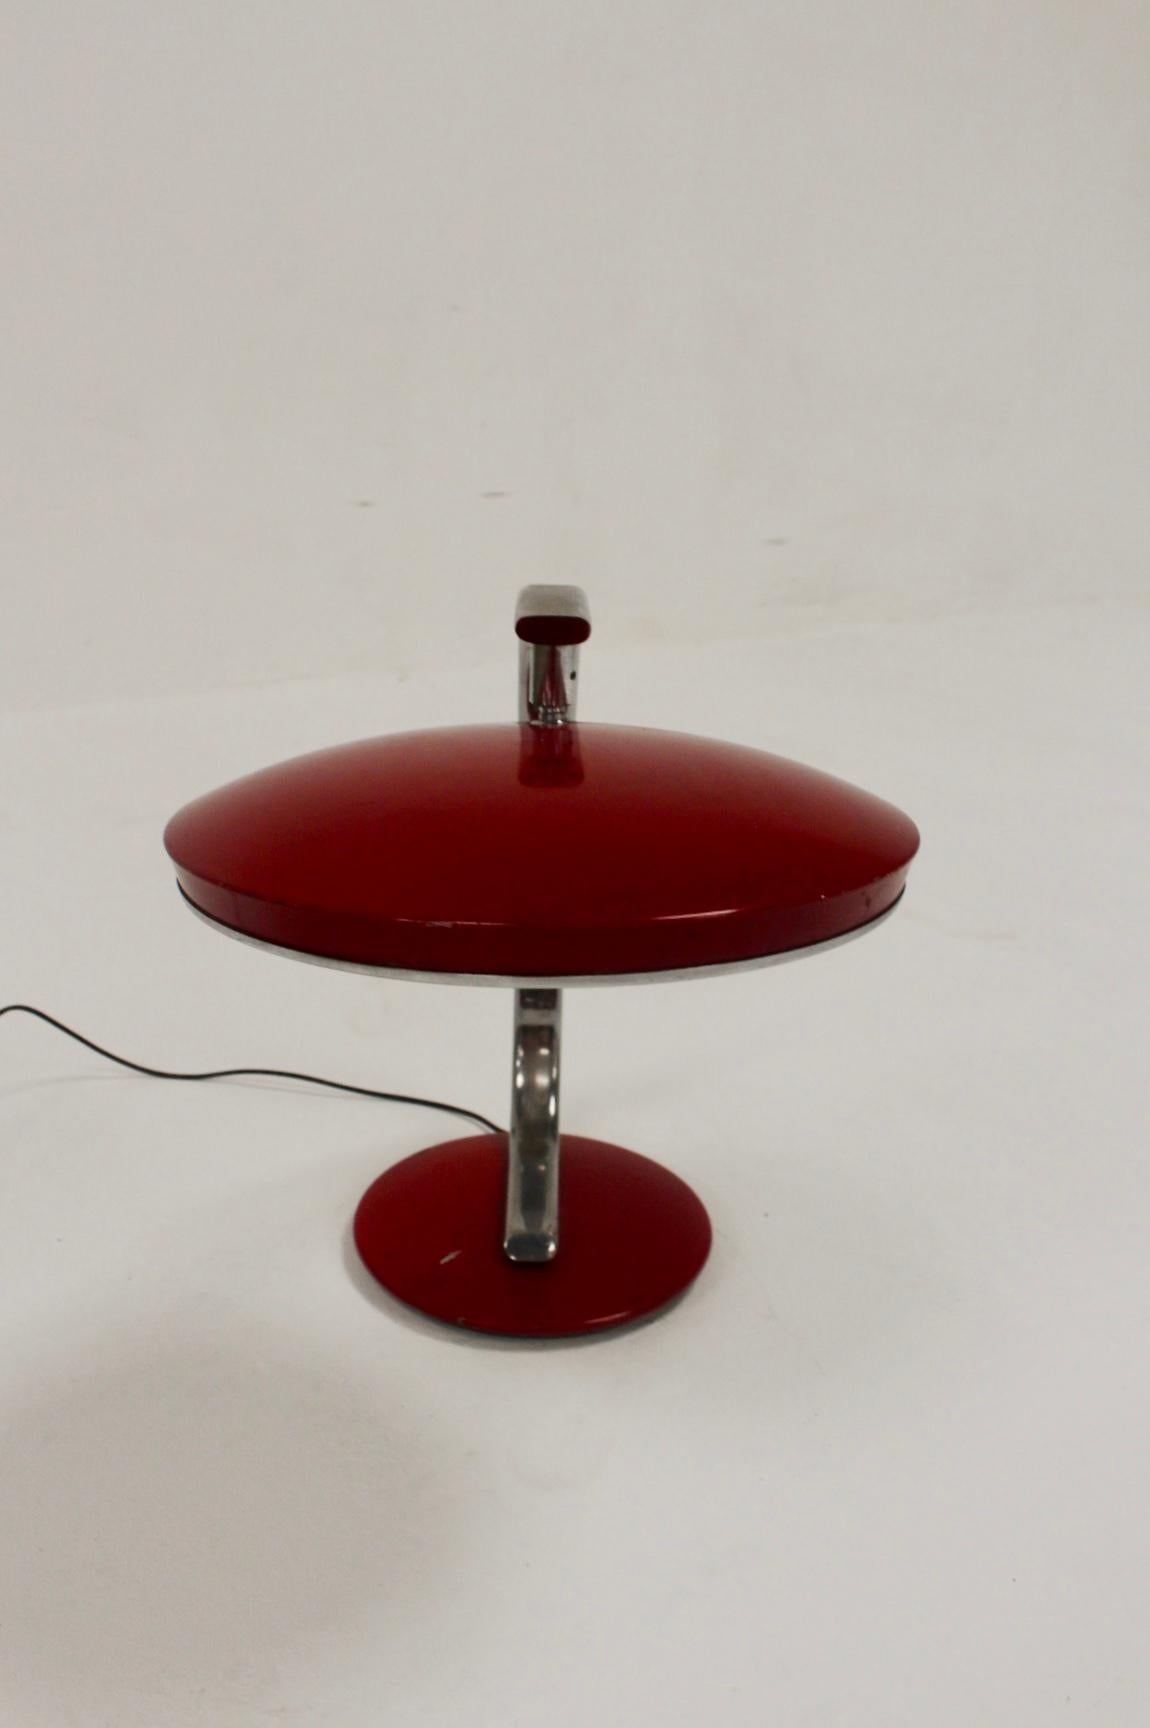 Midcentury Fase 520-C Bauhaus design red articulated desk Lamp.
Produced by Fase Industries in Madrid, in the 1970s.
Good vintage condition.